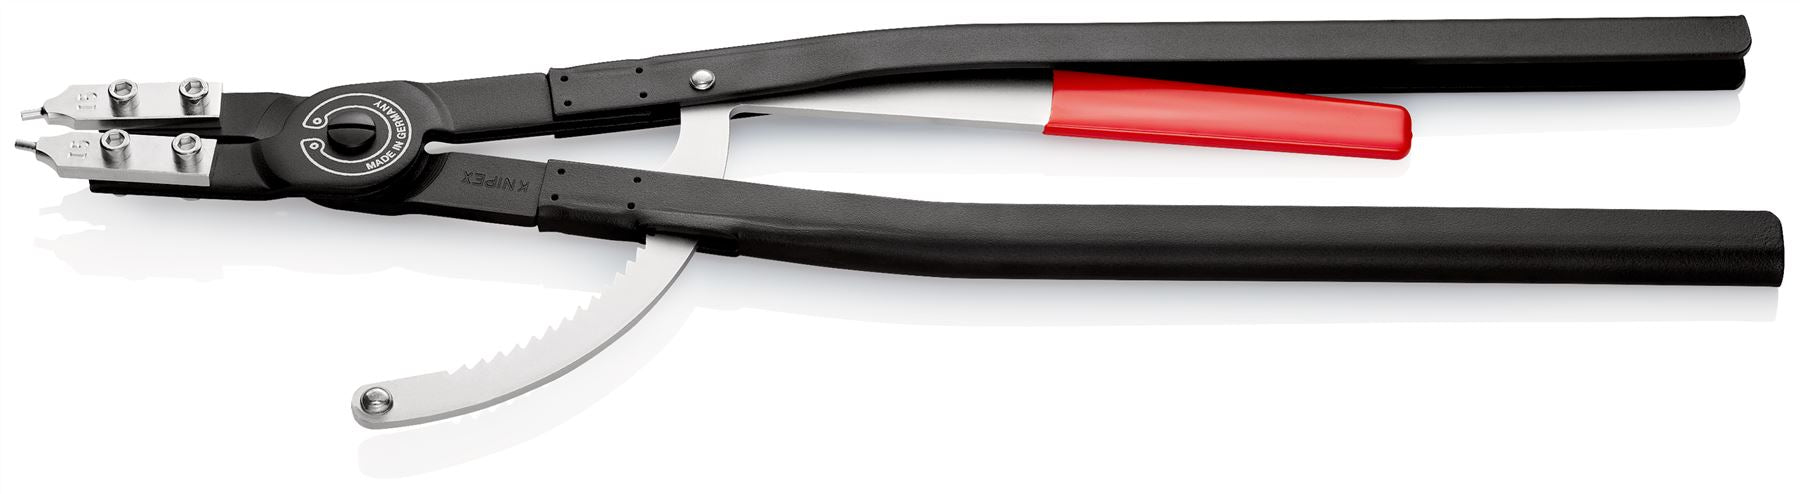 KNIPEX Circlip Pliers for Internal Circlips in Bore Holes 570mm 3.5mm Diameter Tips 44 10 J5